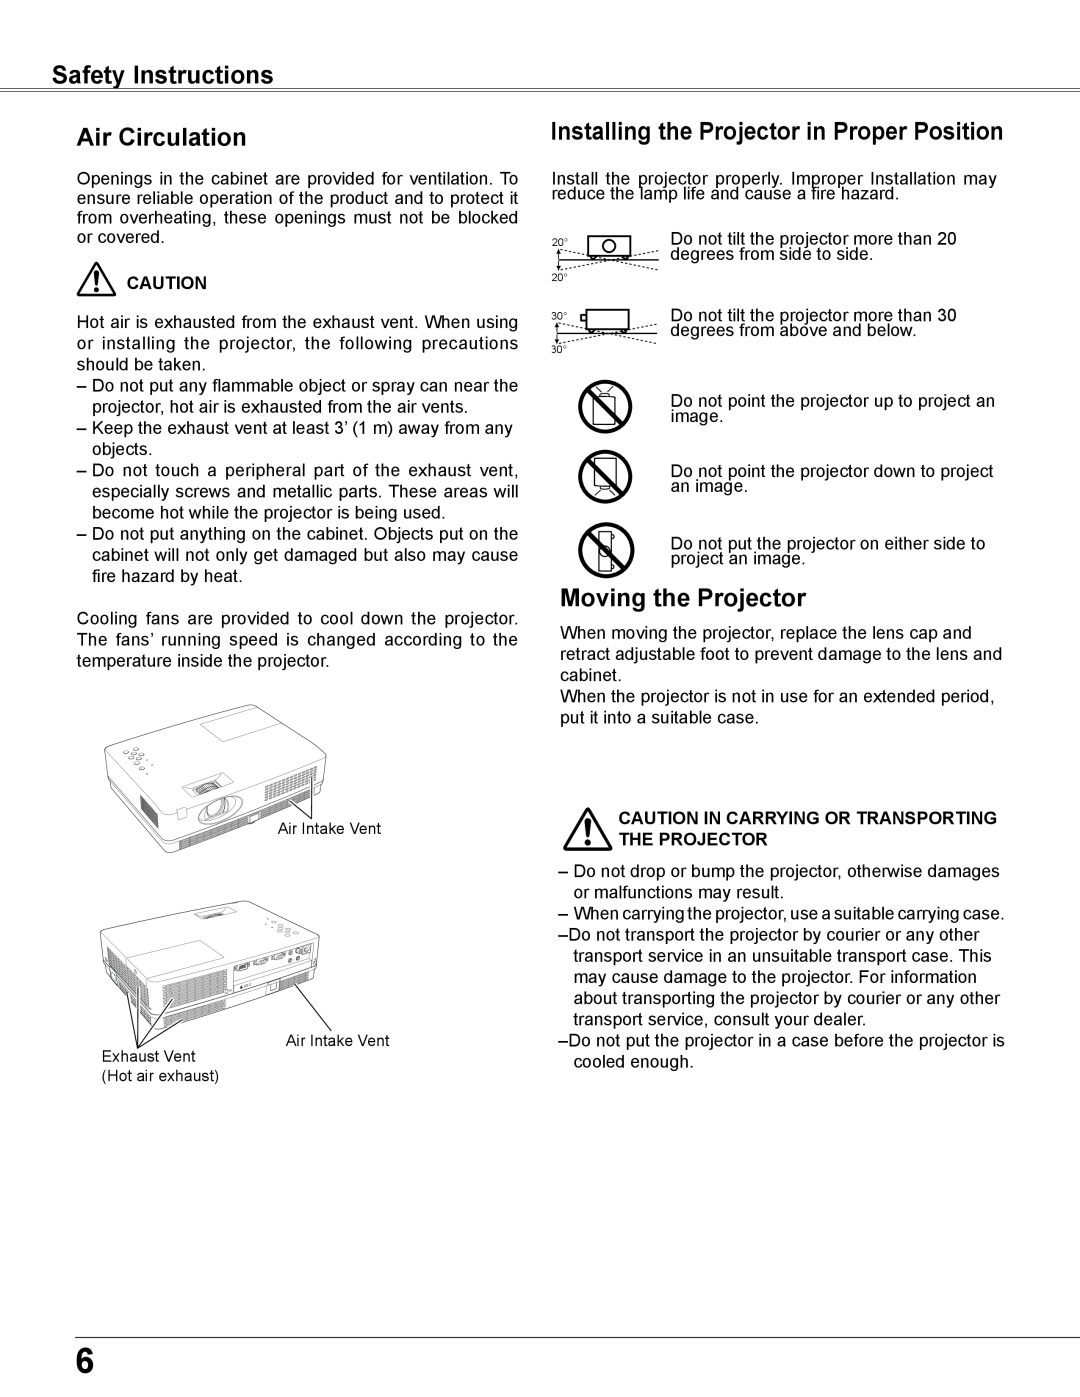 Elmo CRP-26 Safety Instructions Air Circulation, Installing the Projector in Proper Position, Moving the Projector 